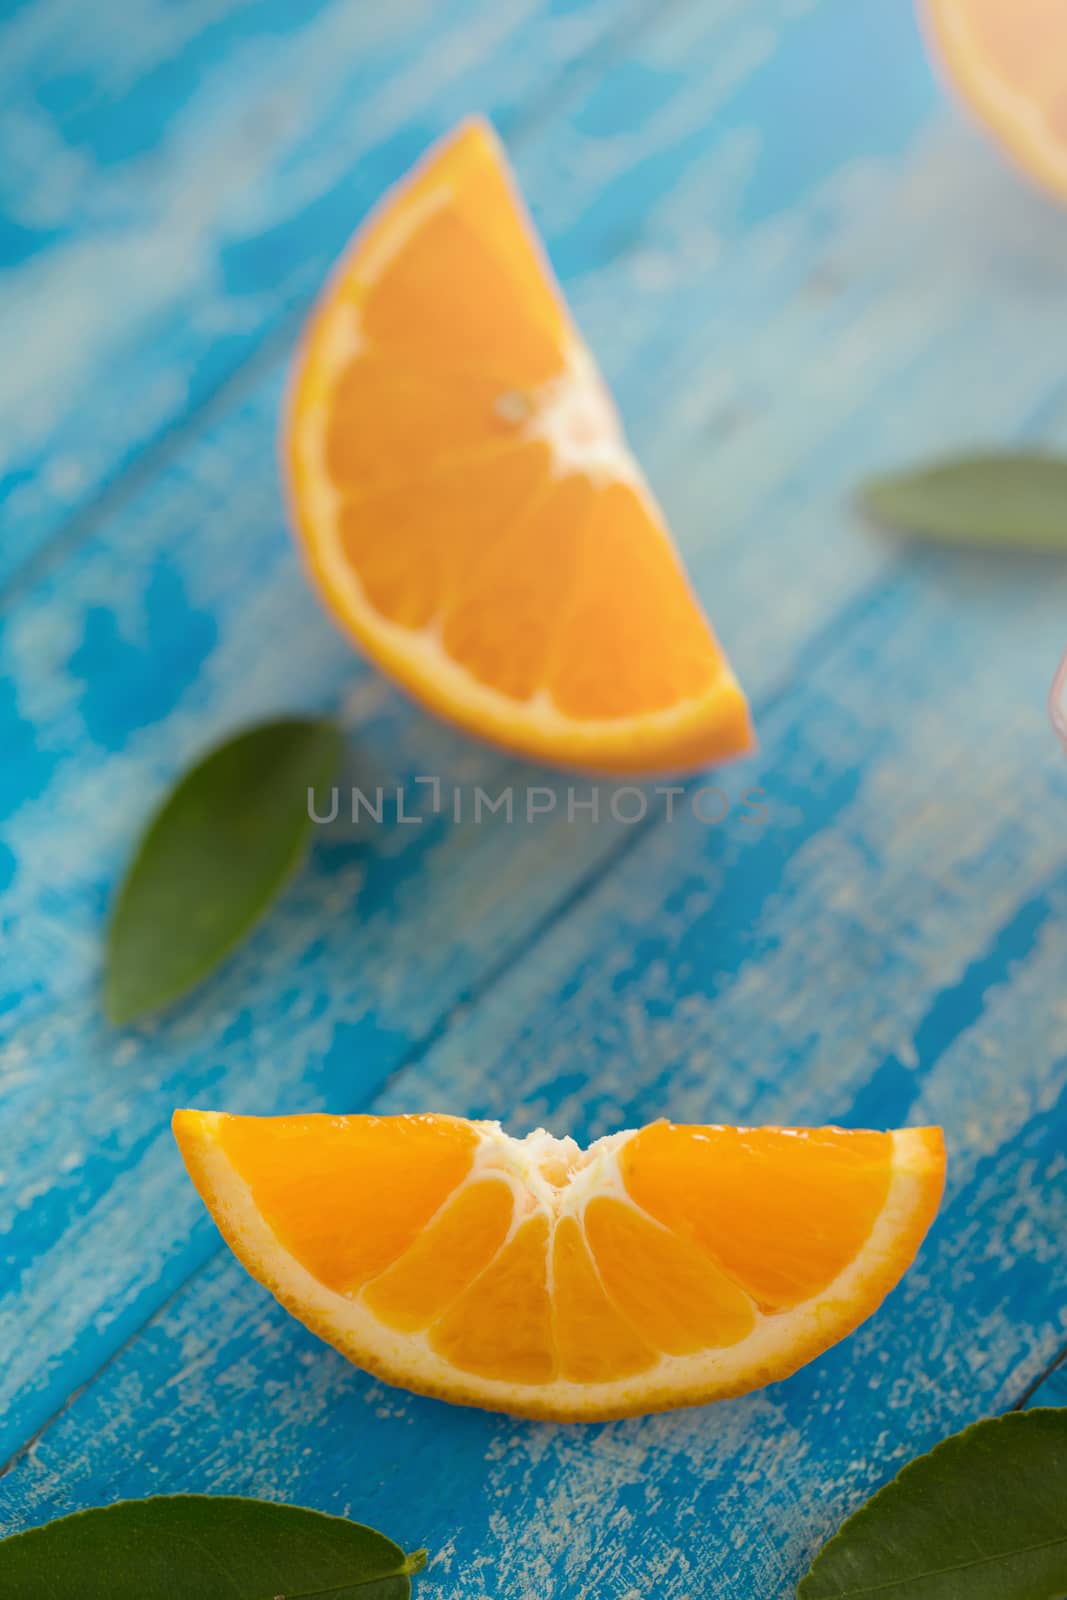 Orange sliced and leaves on blue wooden background by kaiskynet